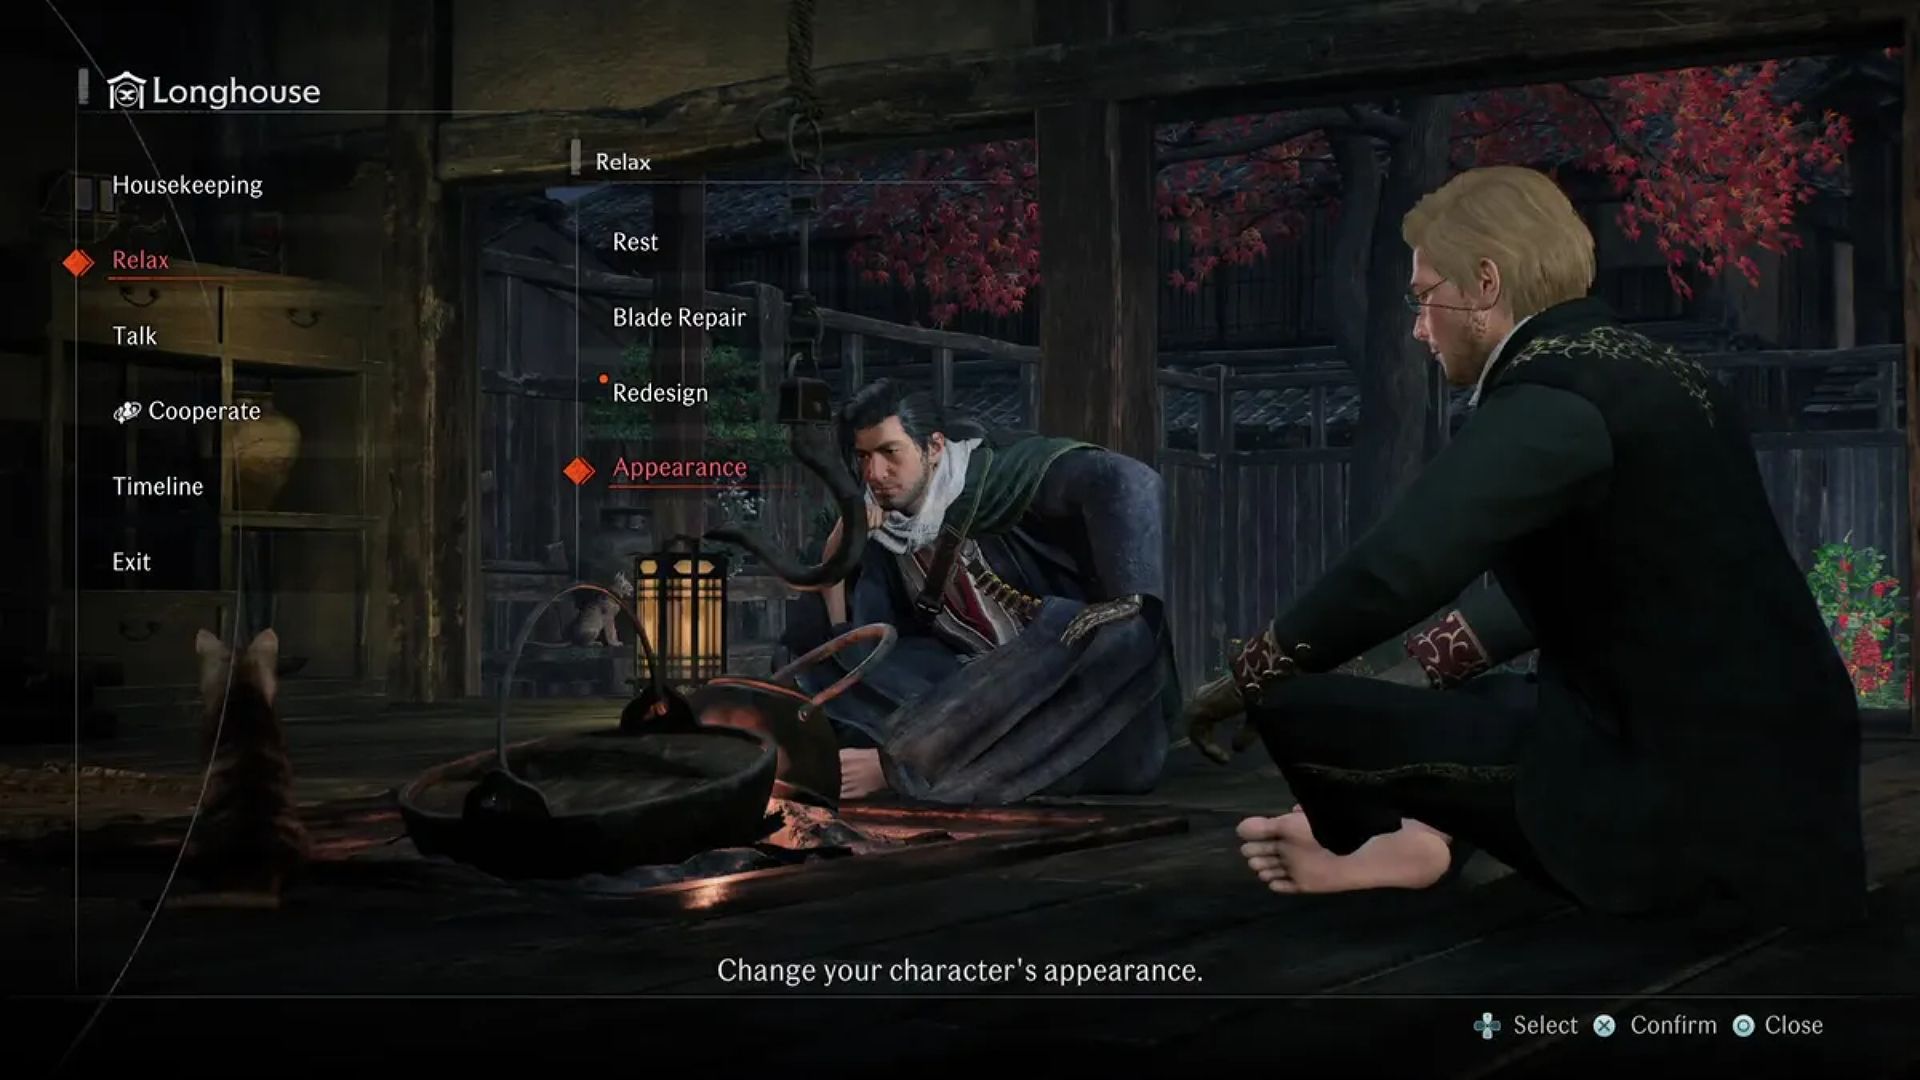 The Appearance option in the Longhouse in Rise of the Ronin